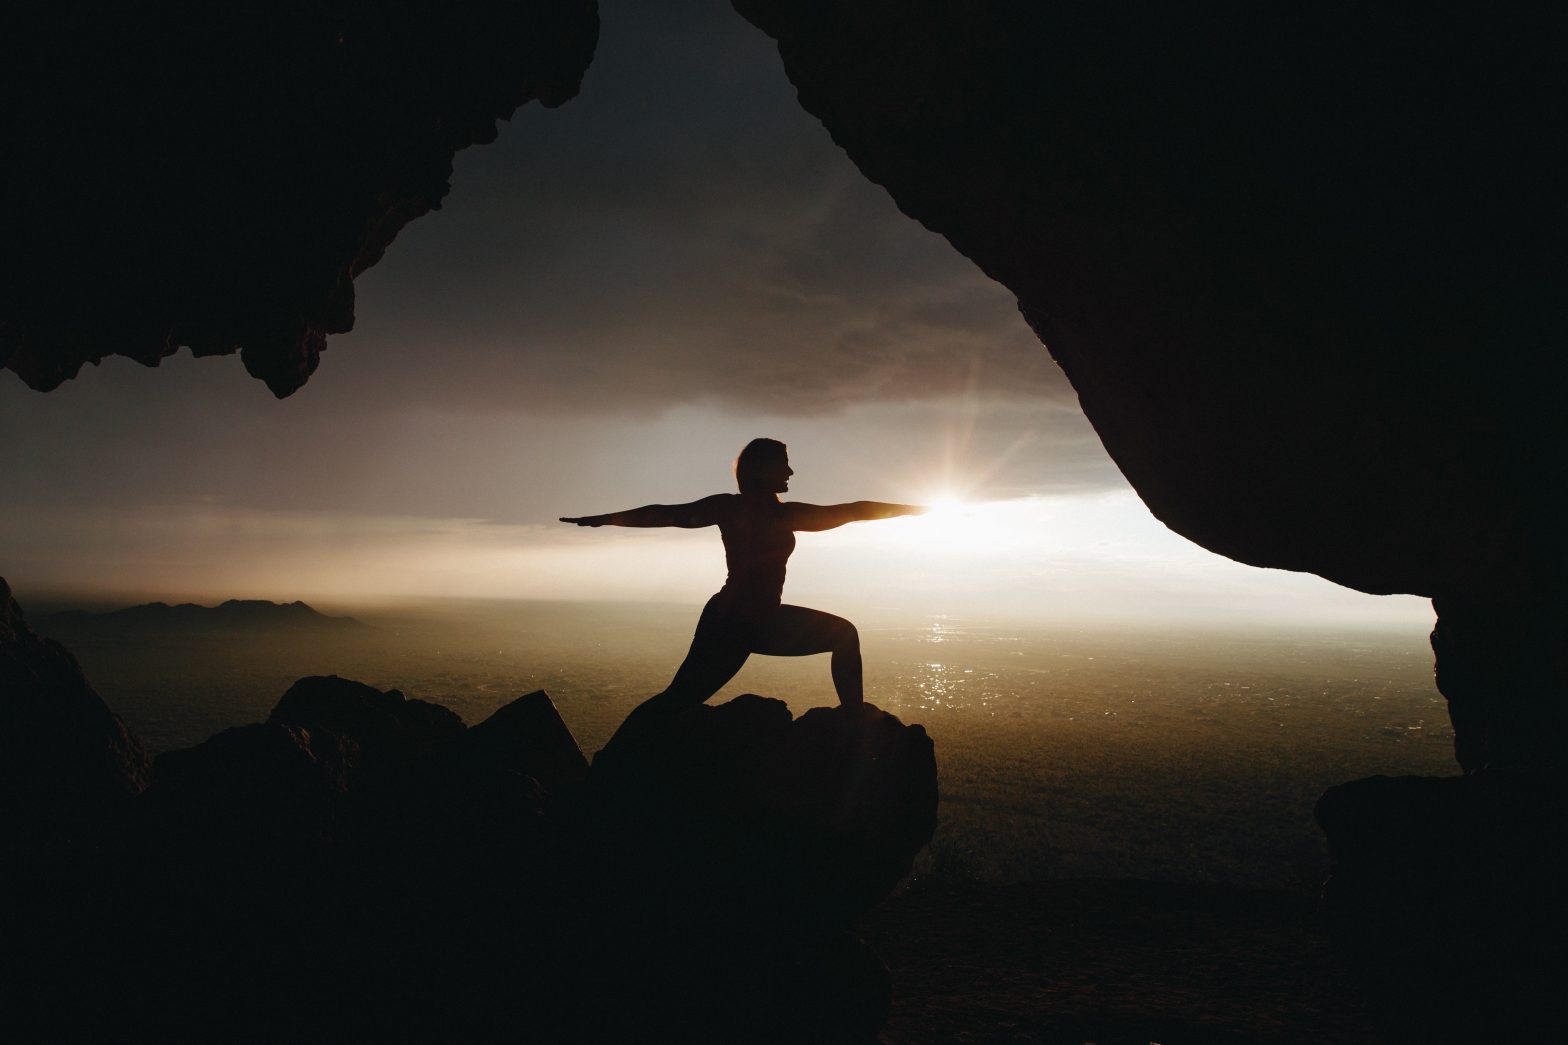 Standing on a rock doing yoga, a woman's silhouette shows that fifteen minutes of daily yoga can boost wellness.